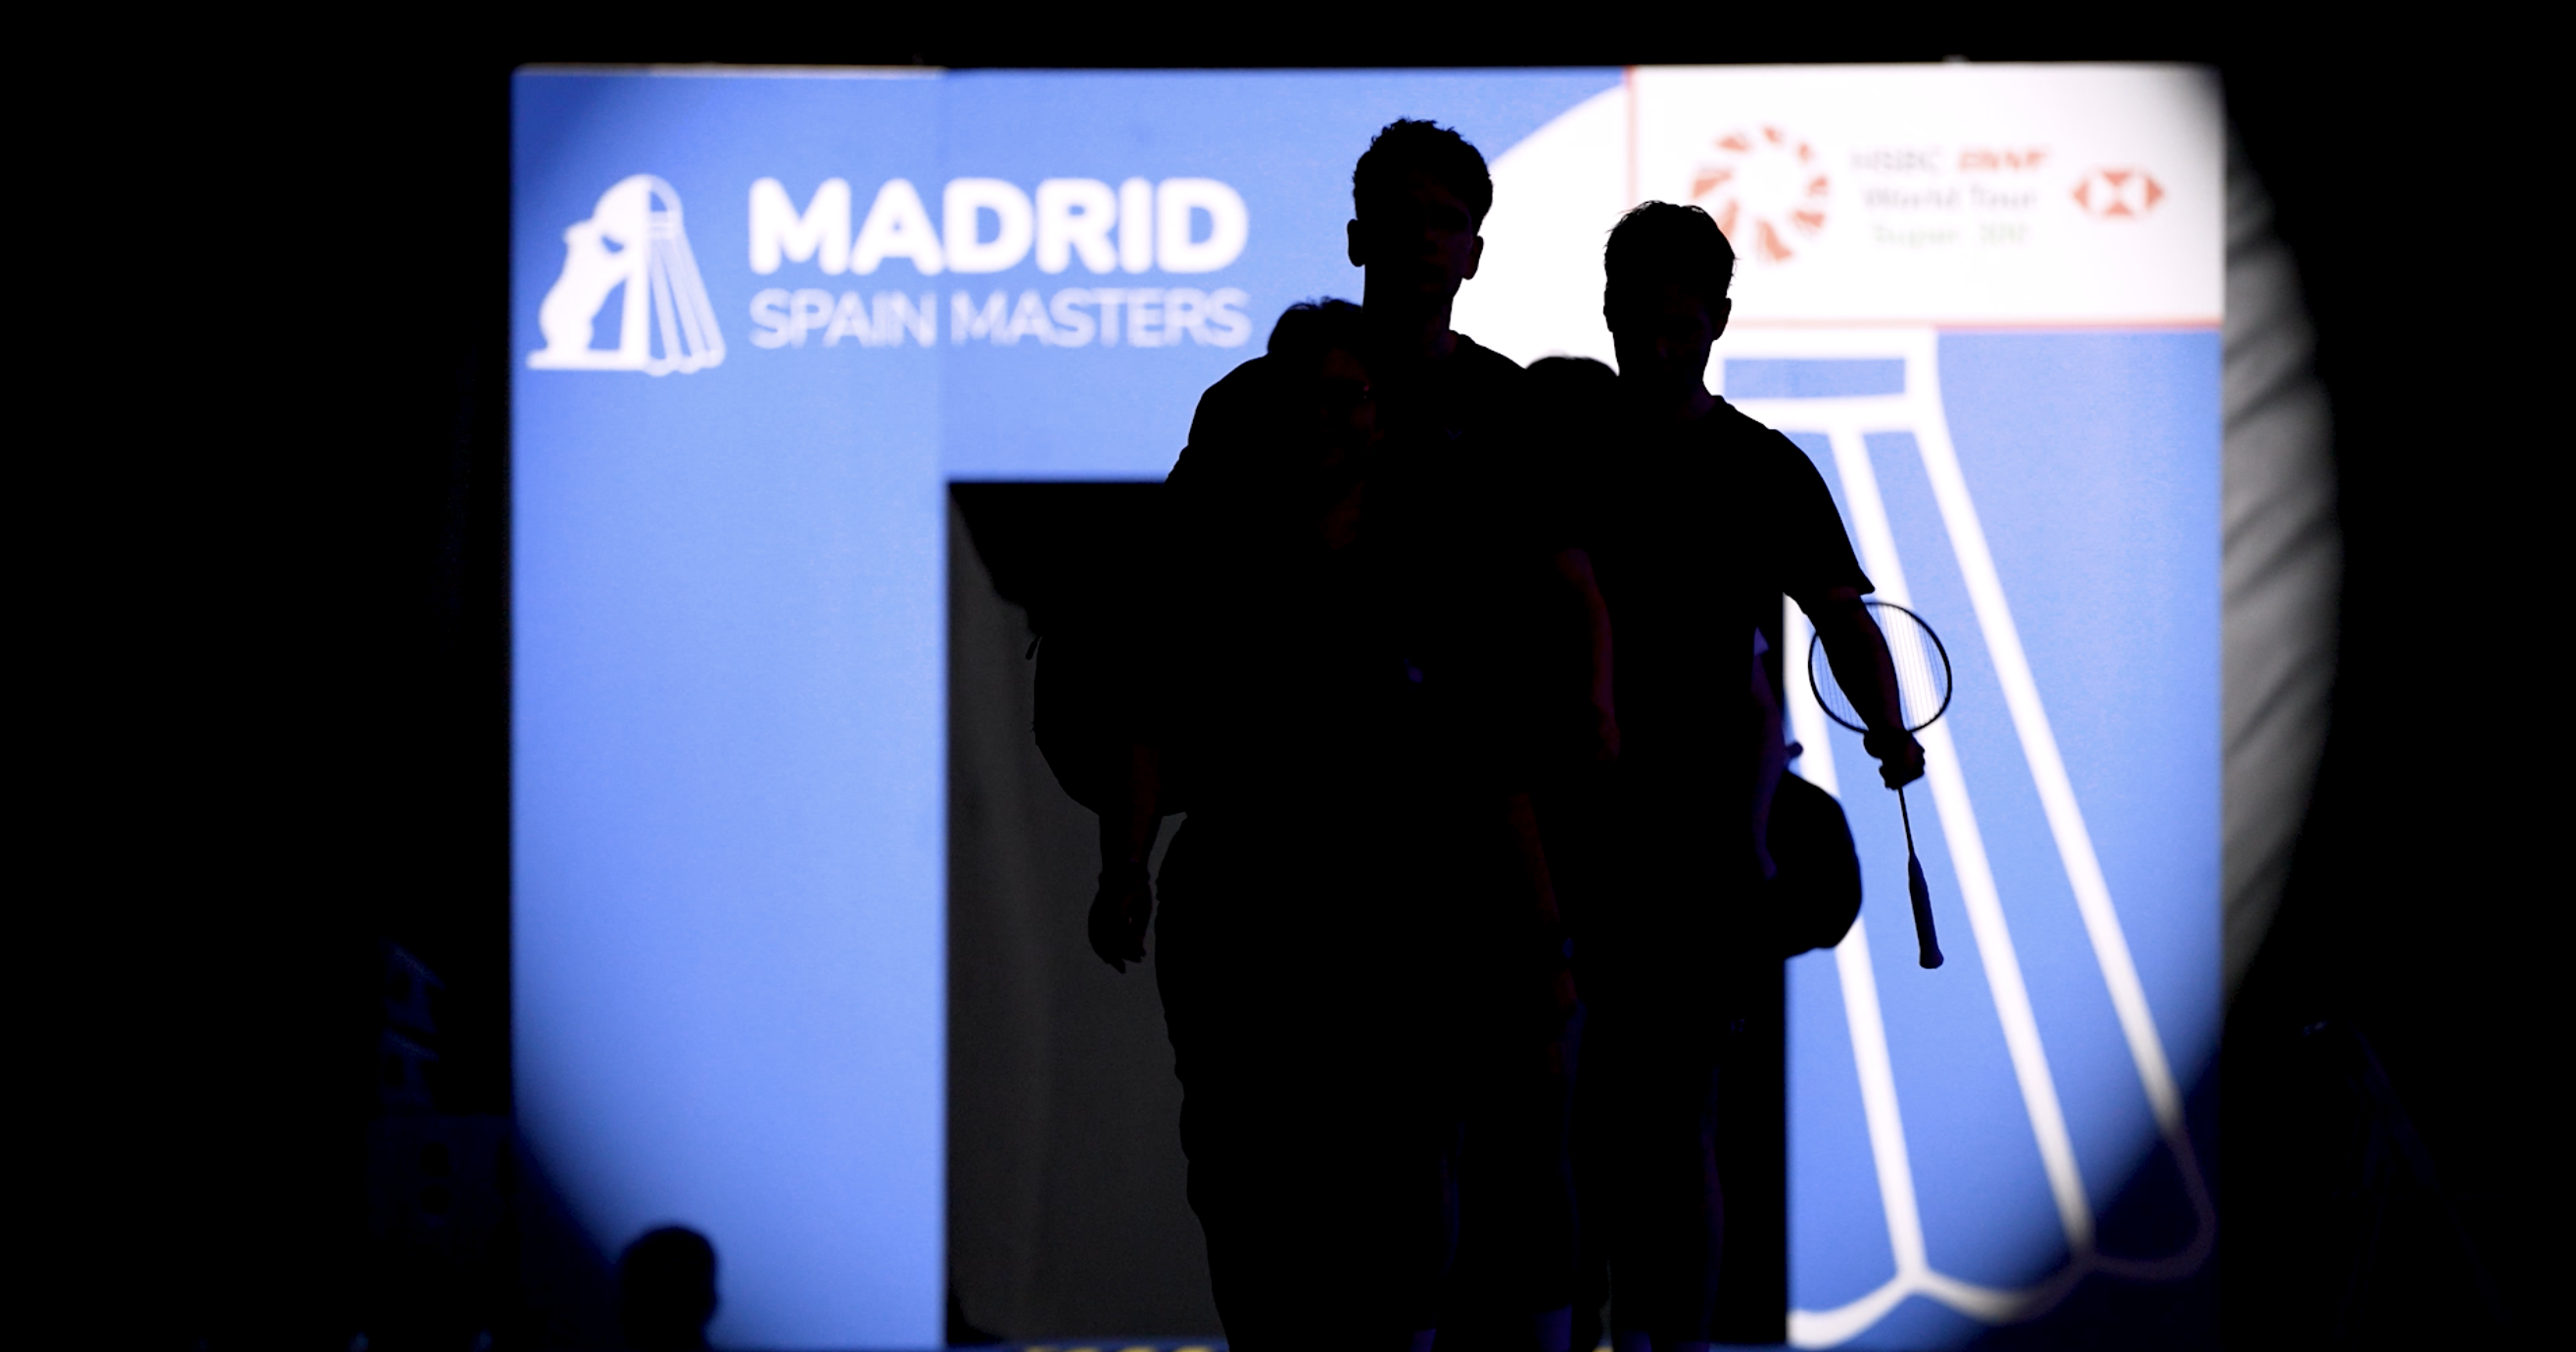 The report on the Madrid Spain Masters released on Teledeporte